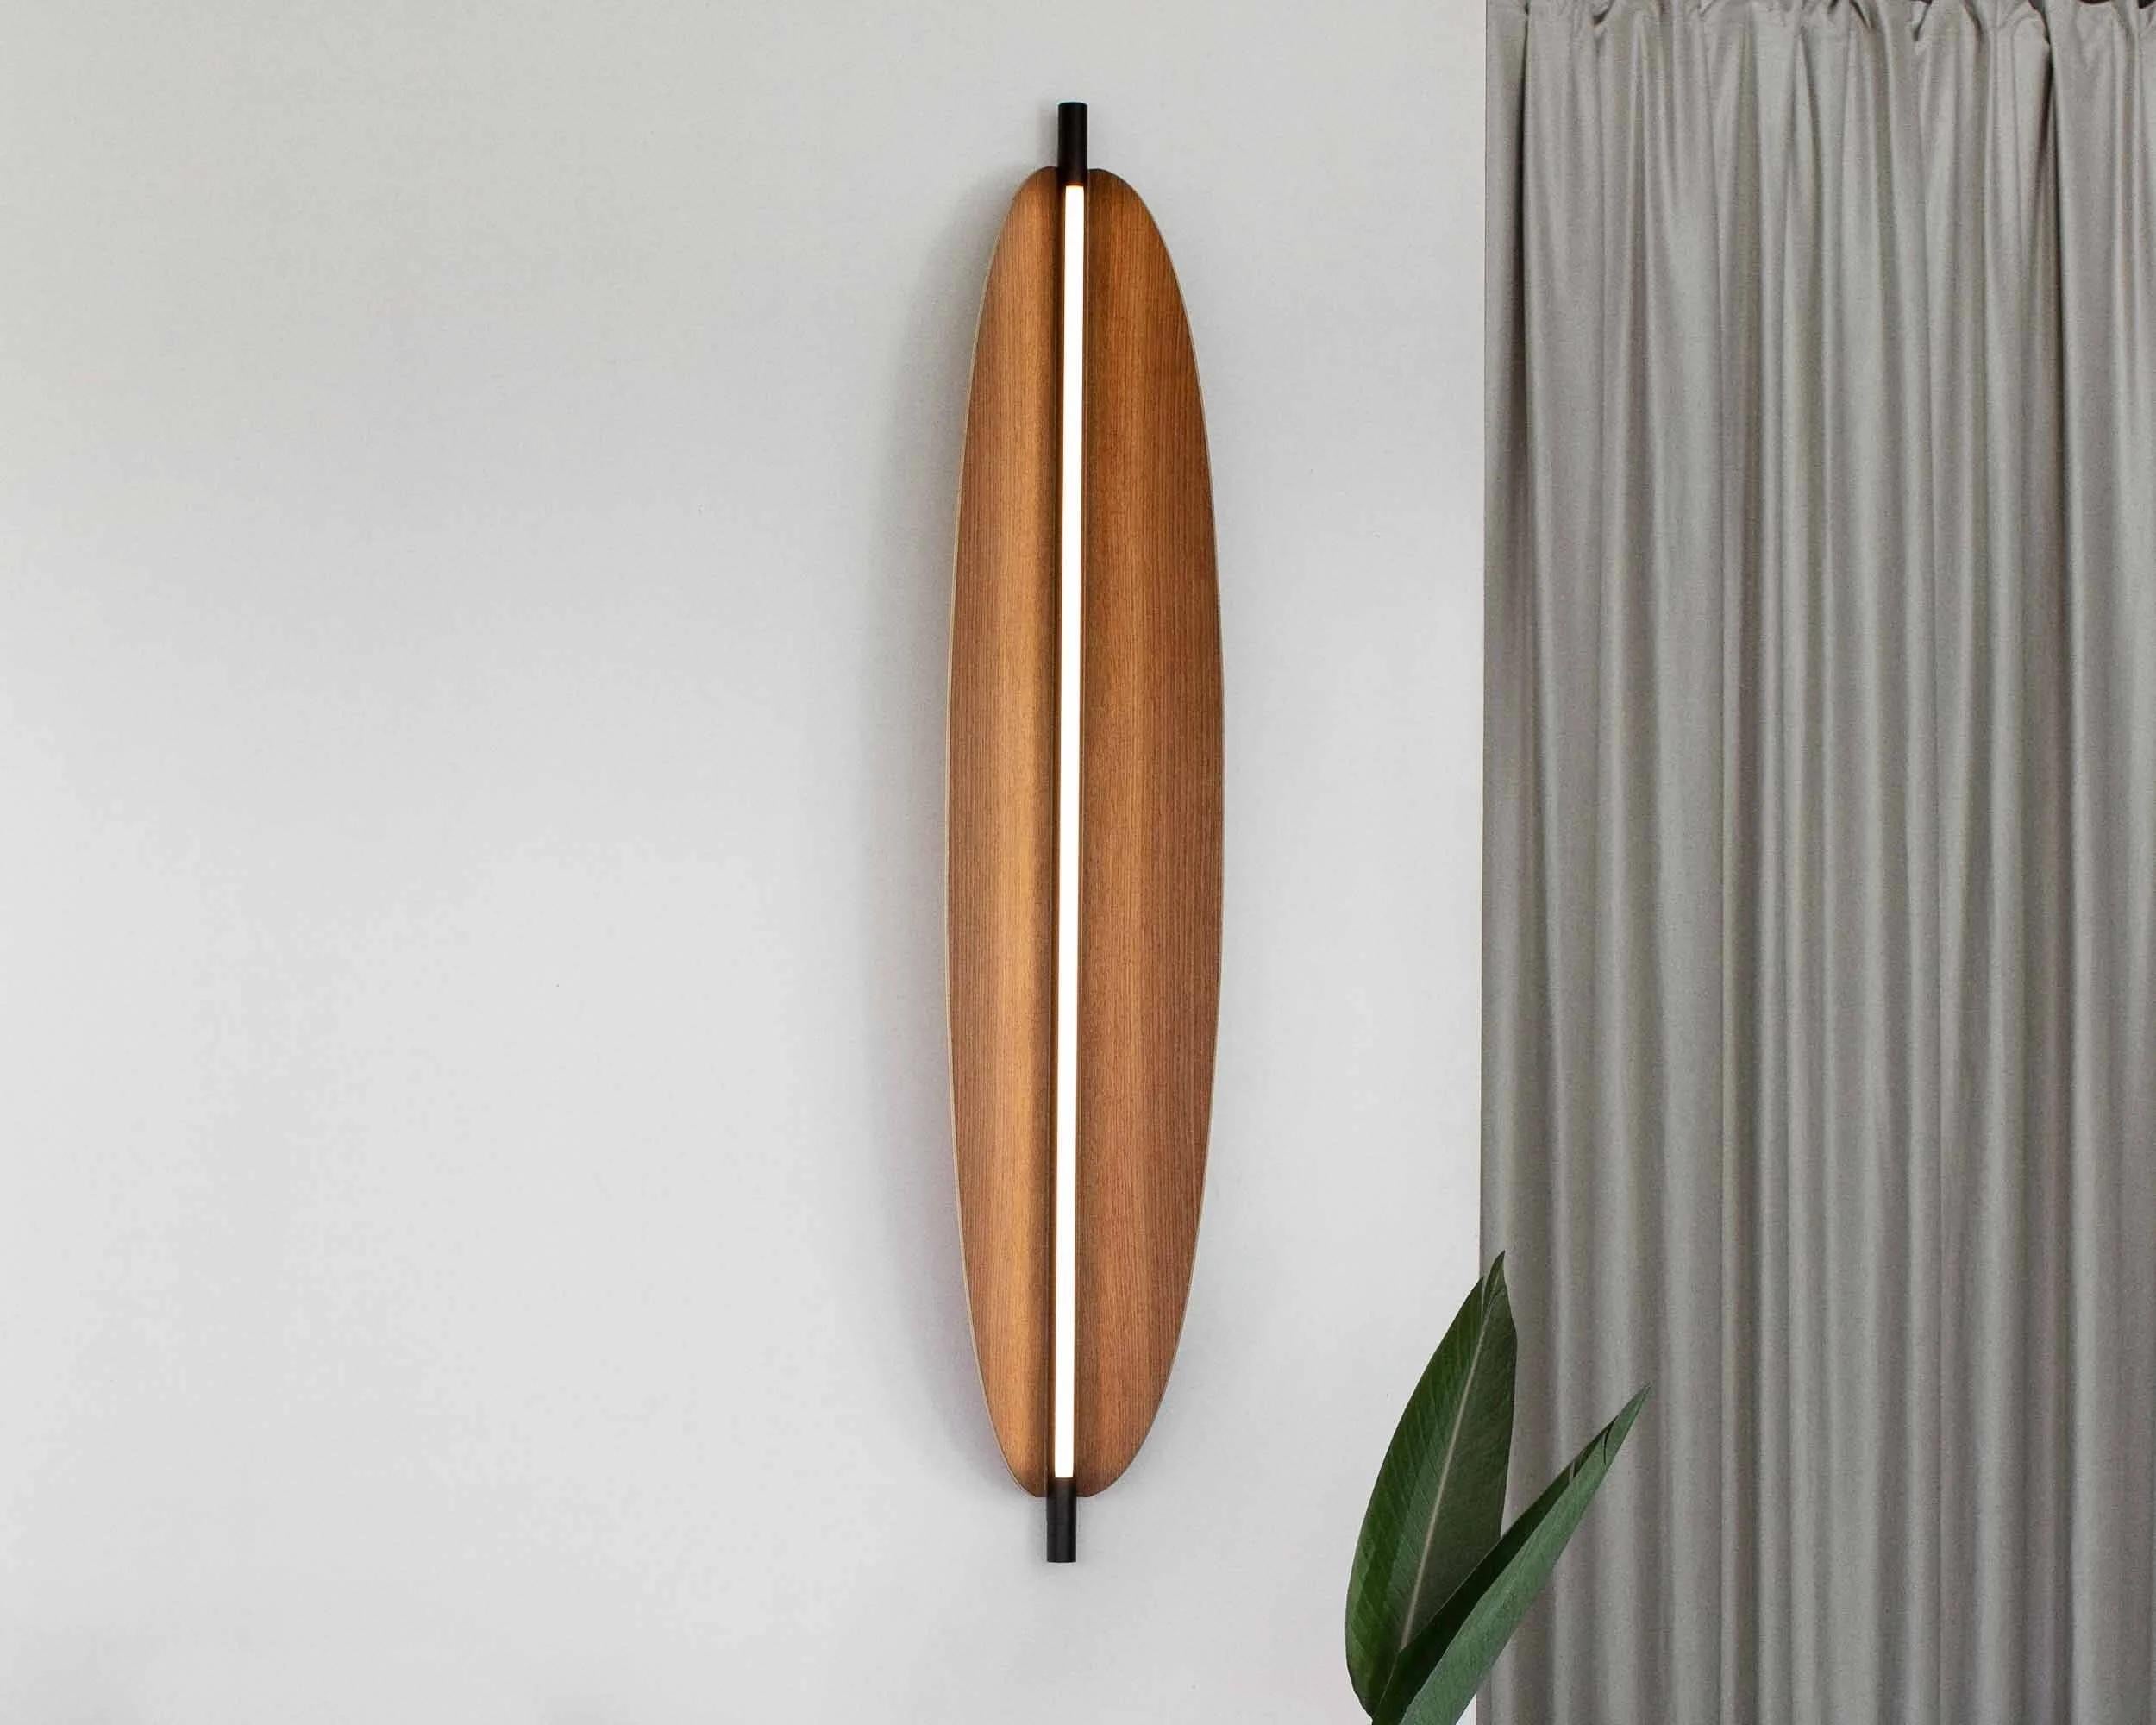 Modern Wall Lamp 'Thula 562.41' by Federica Biasi x Tooy, Beige + Leather For Sale 3